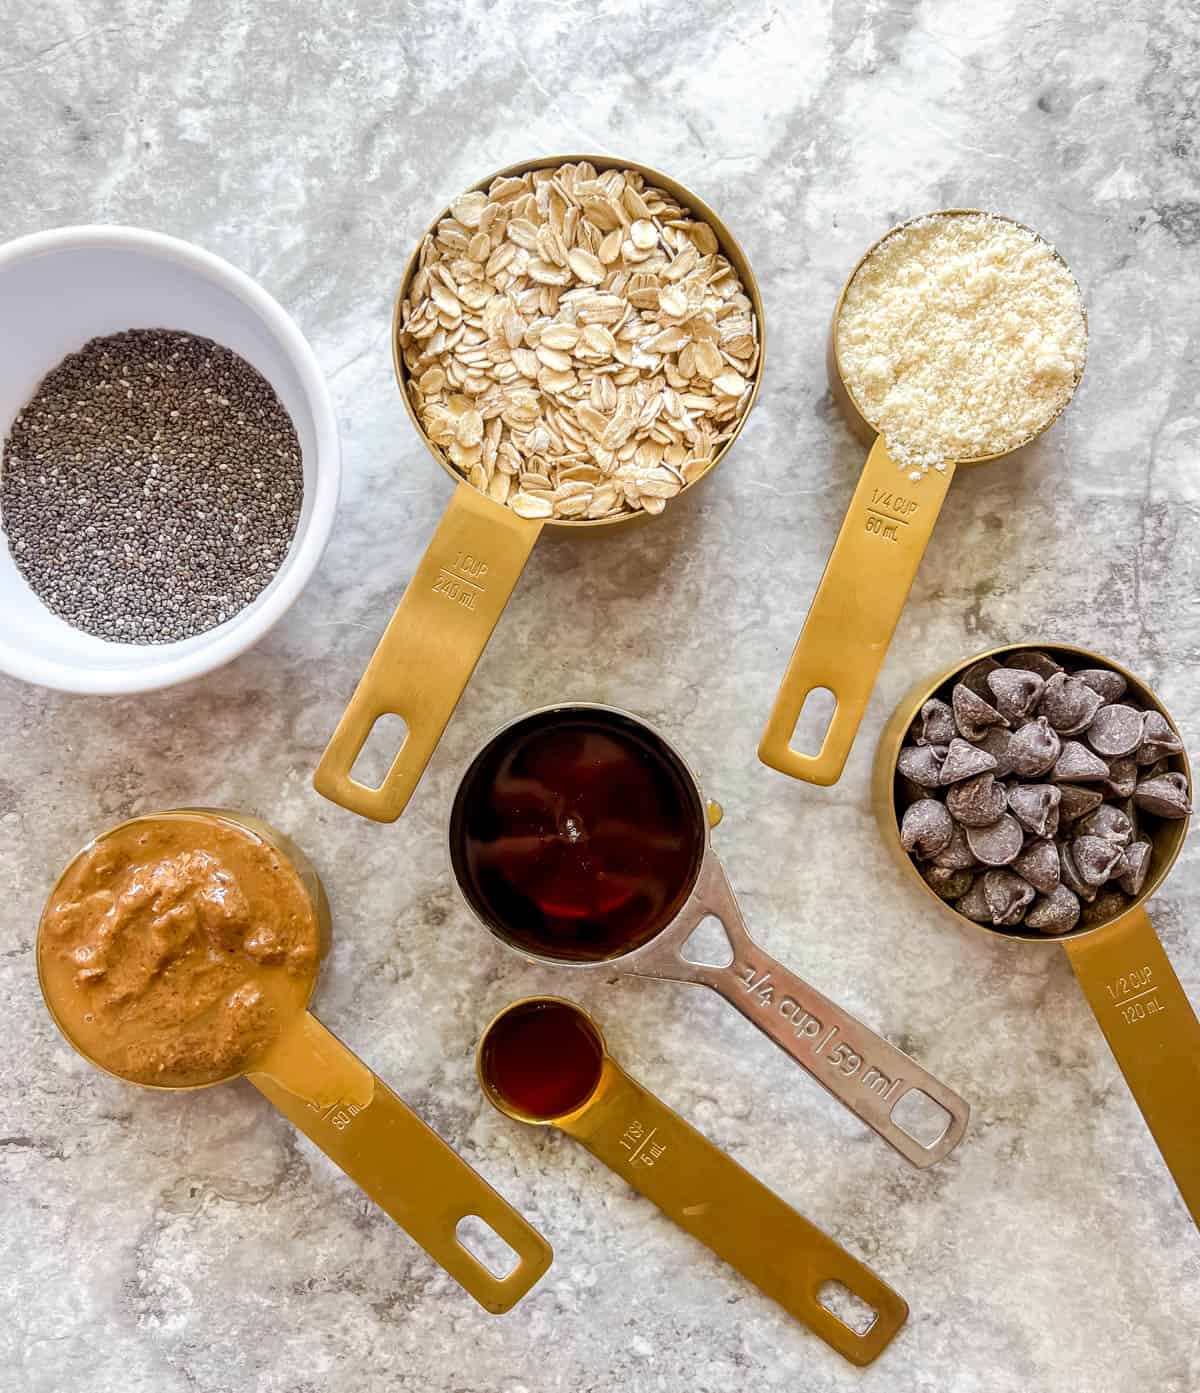 Ingredients needed to make chocolate chip oatmeal balls.